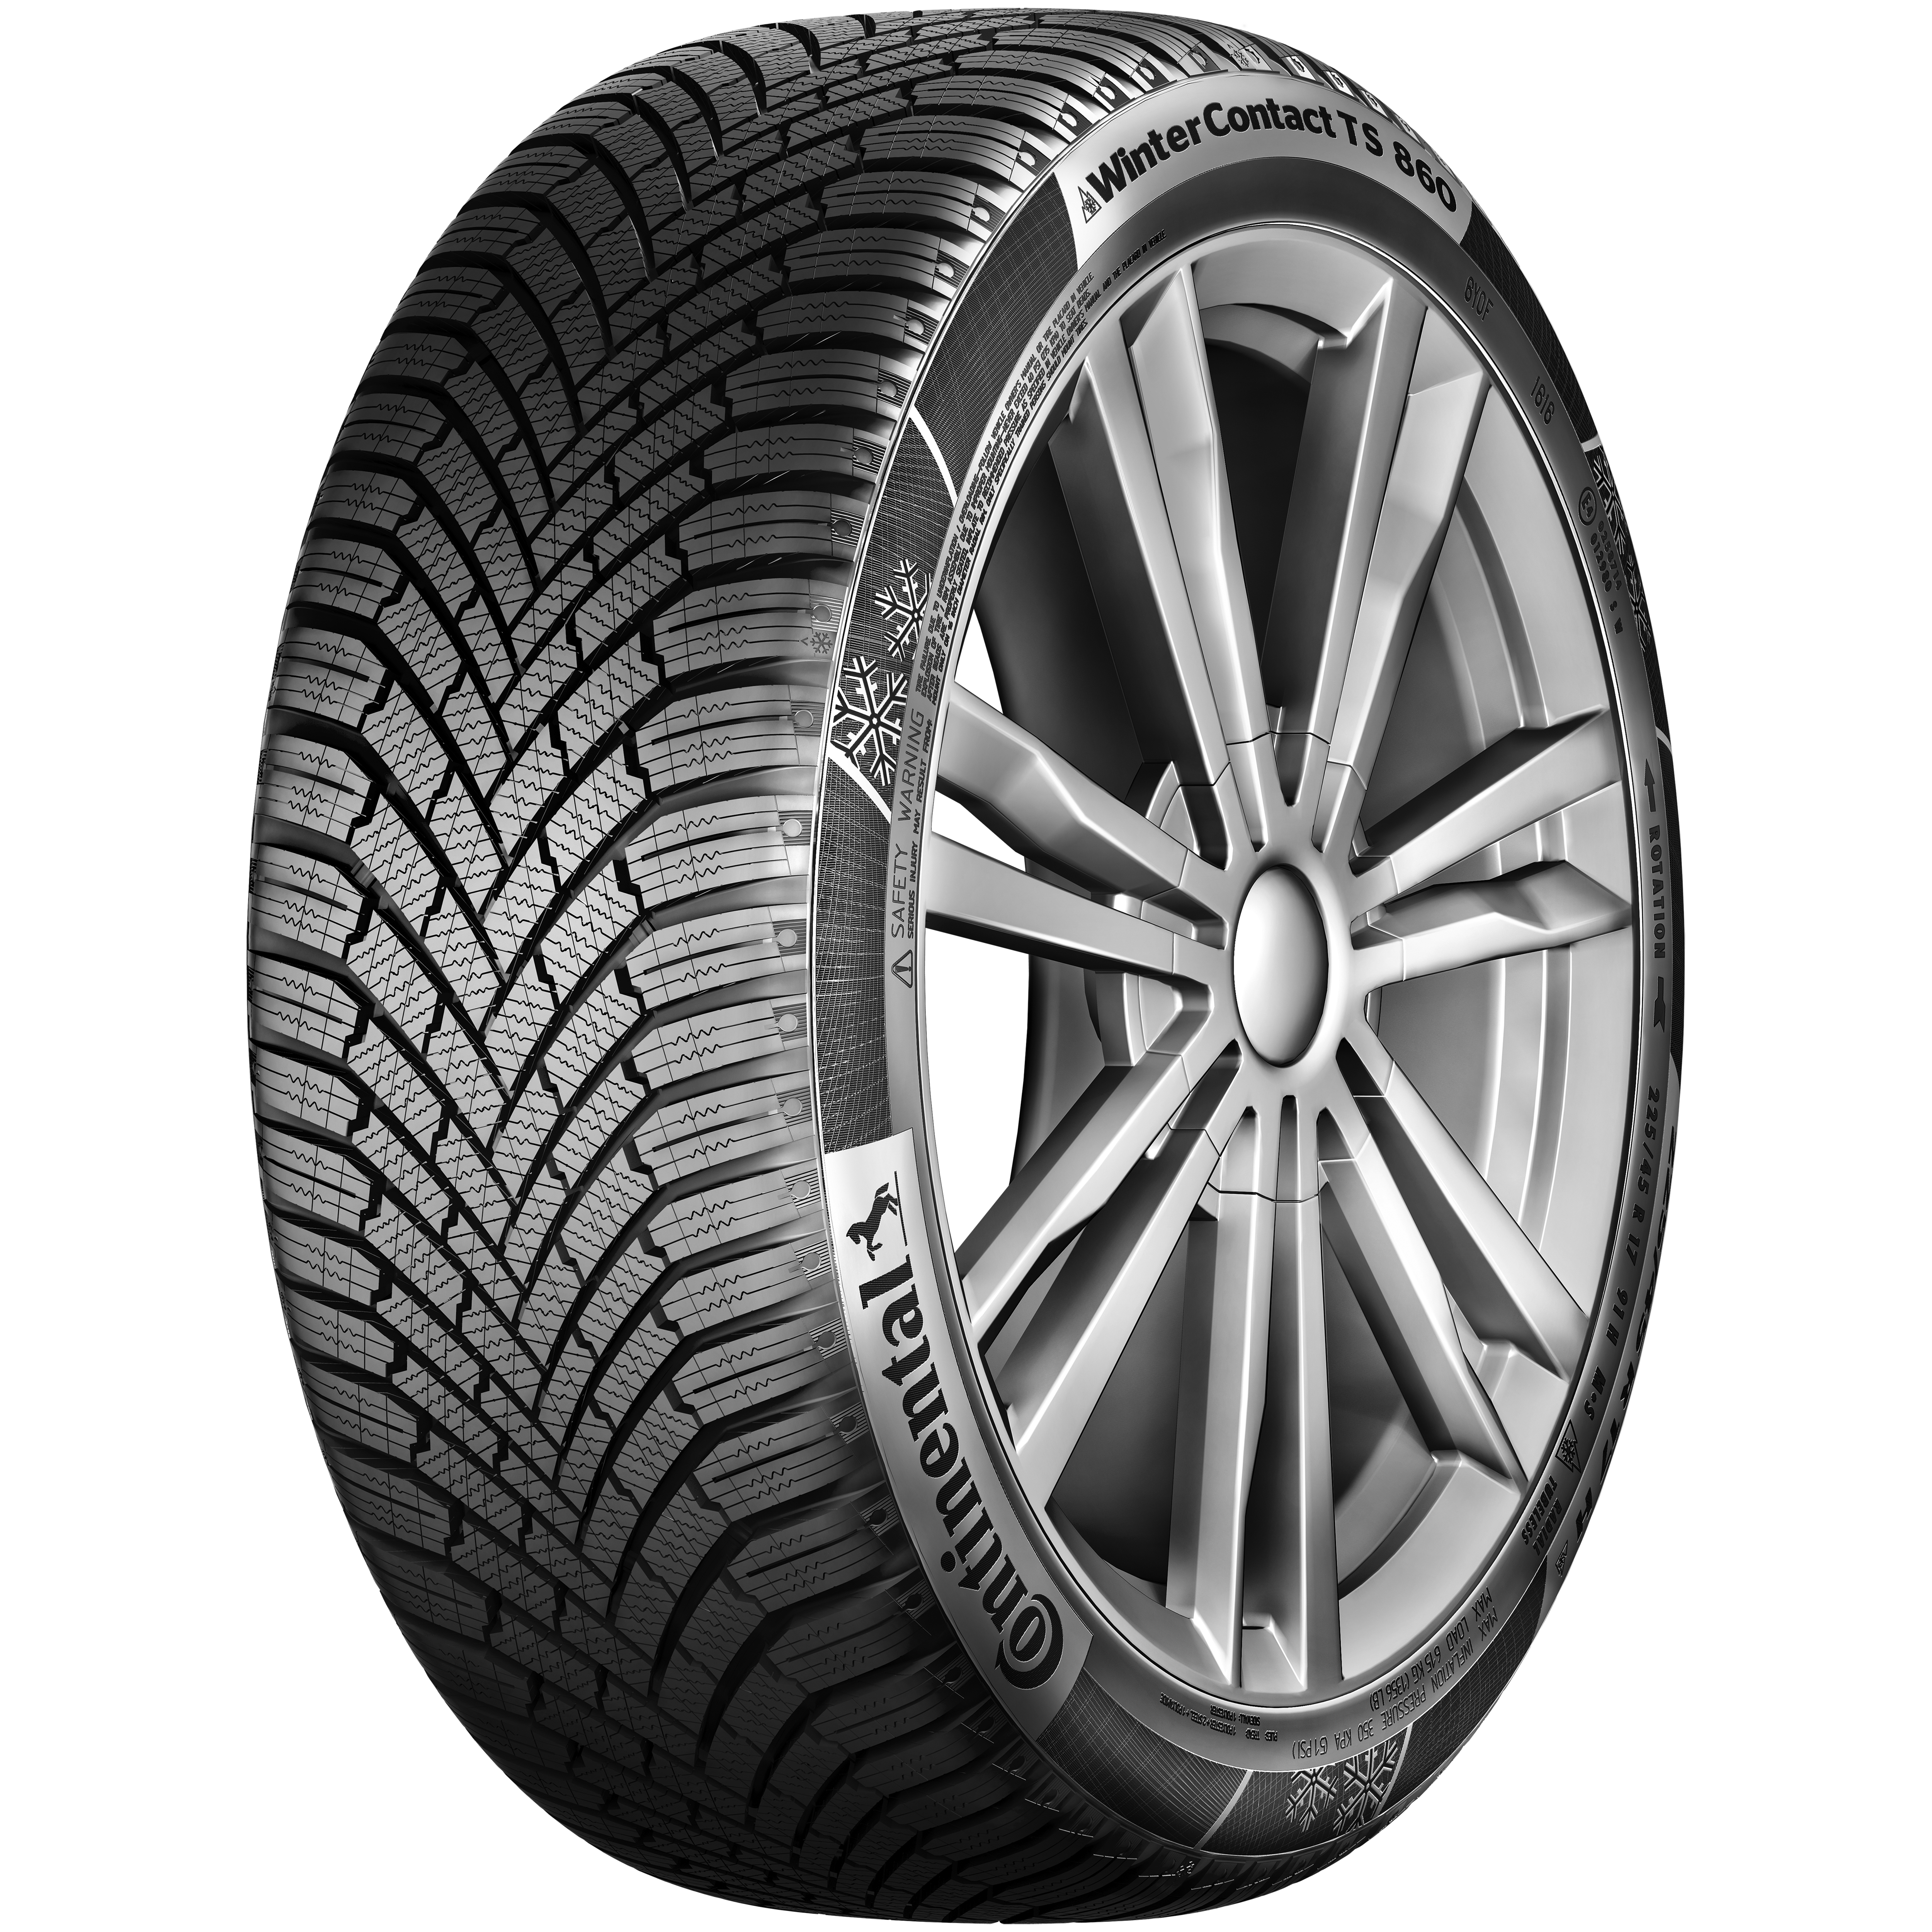 WinterContact TS 860: When just tires you the can\'t trust your winter, trust